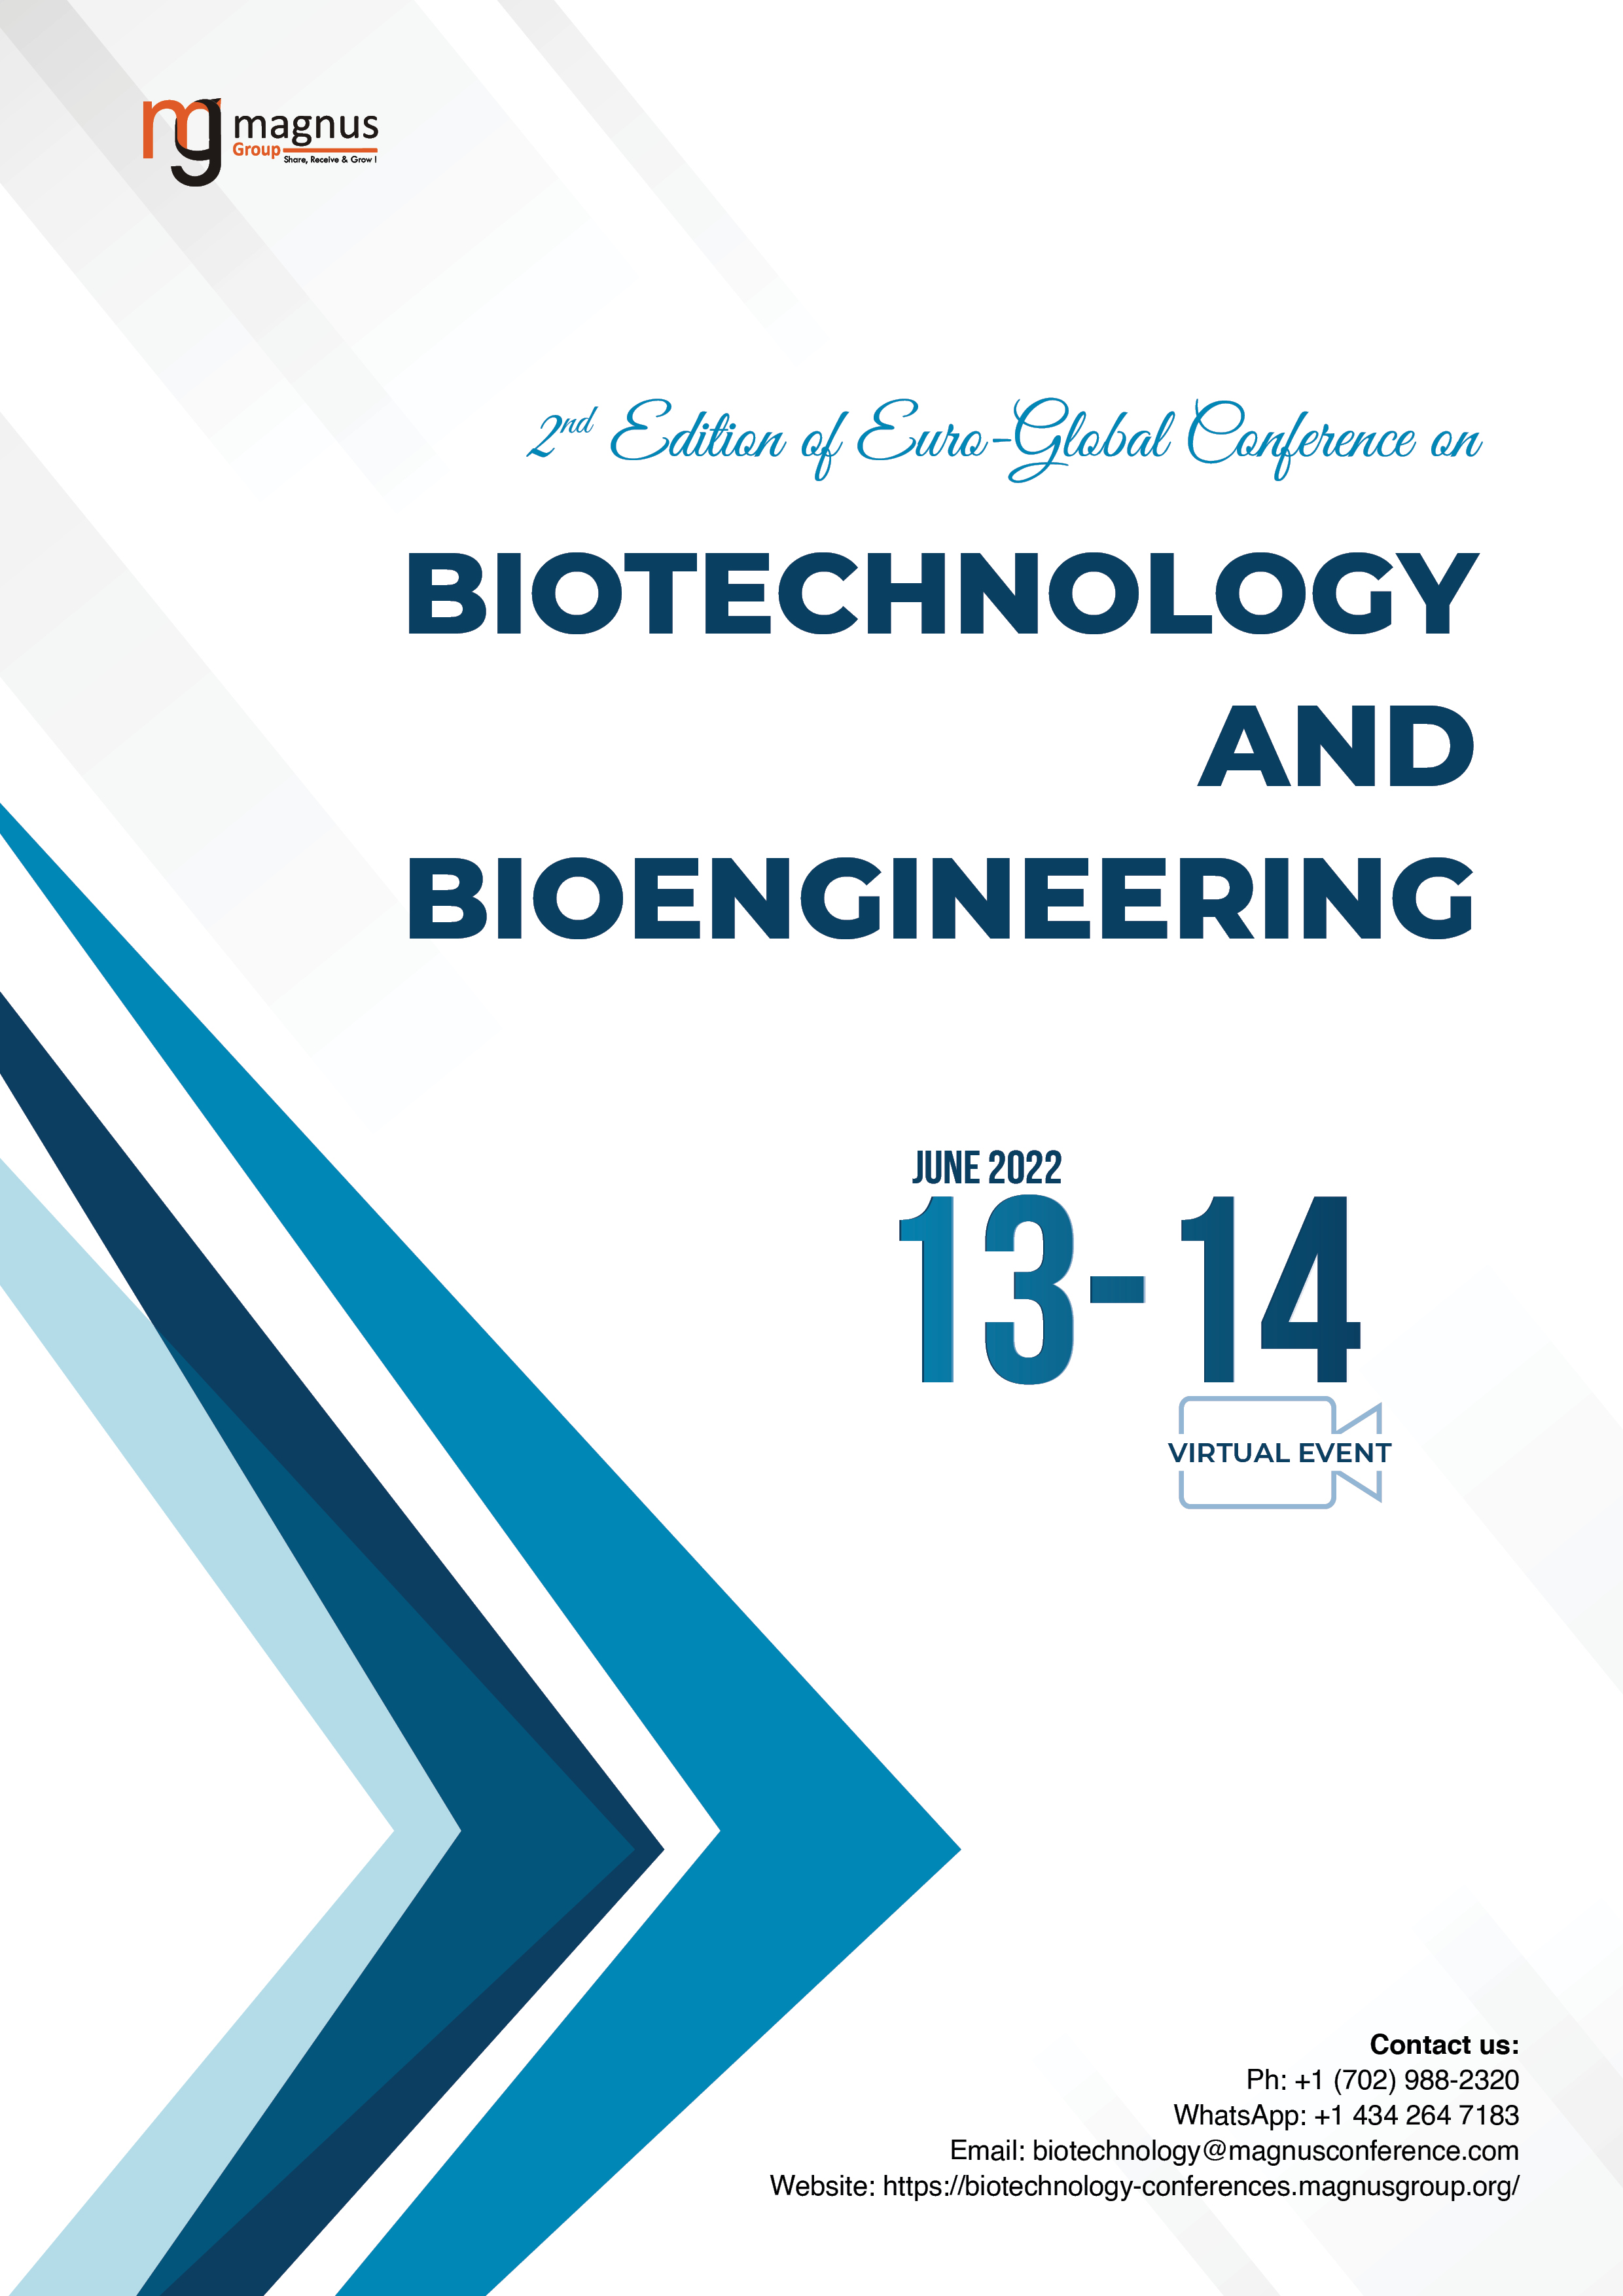 2nd Edition of Euro-Global Conference on Biotechnology and Bioengineering | Online Event Book